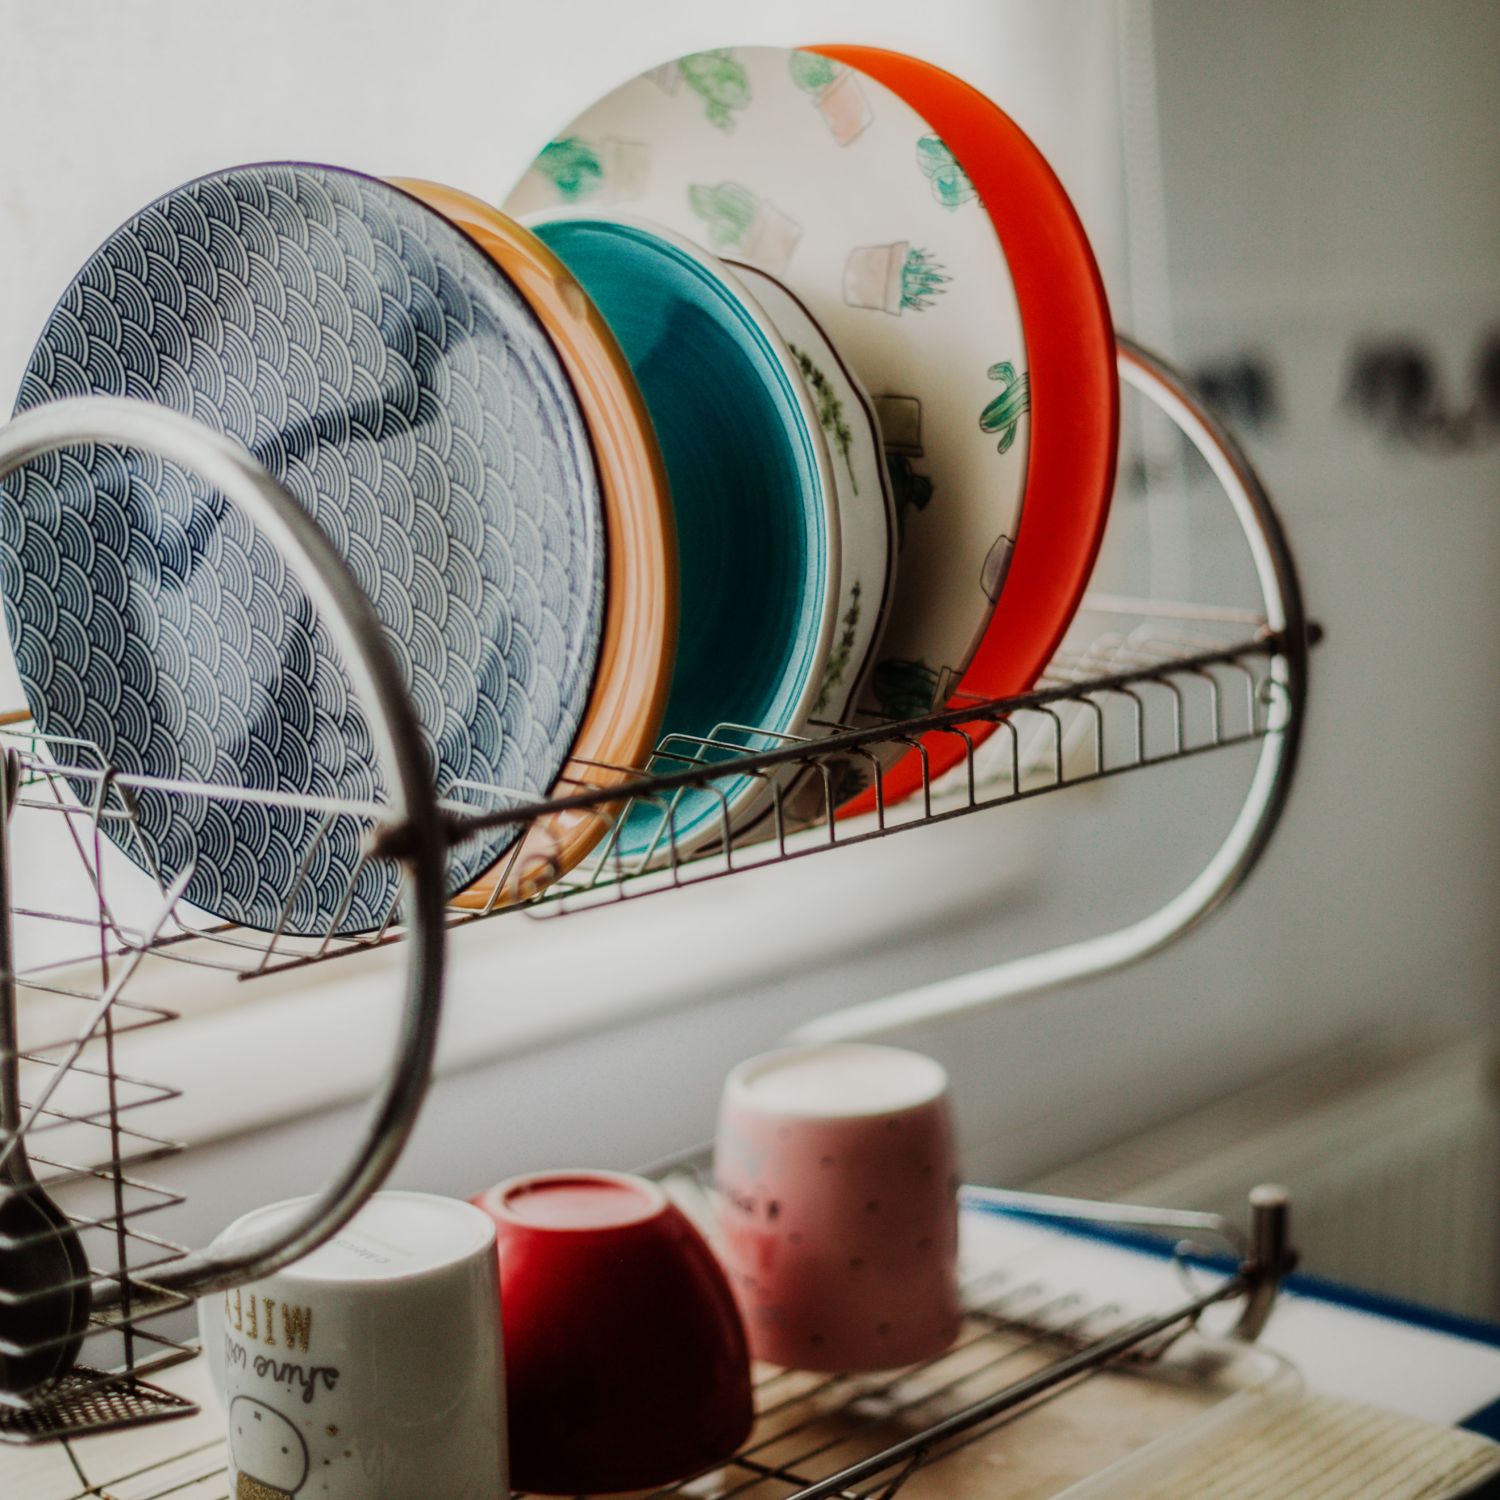 Plates on drying rack in the kitchen